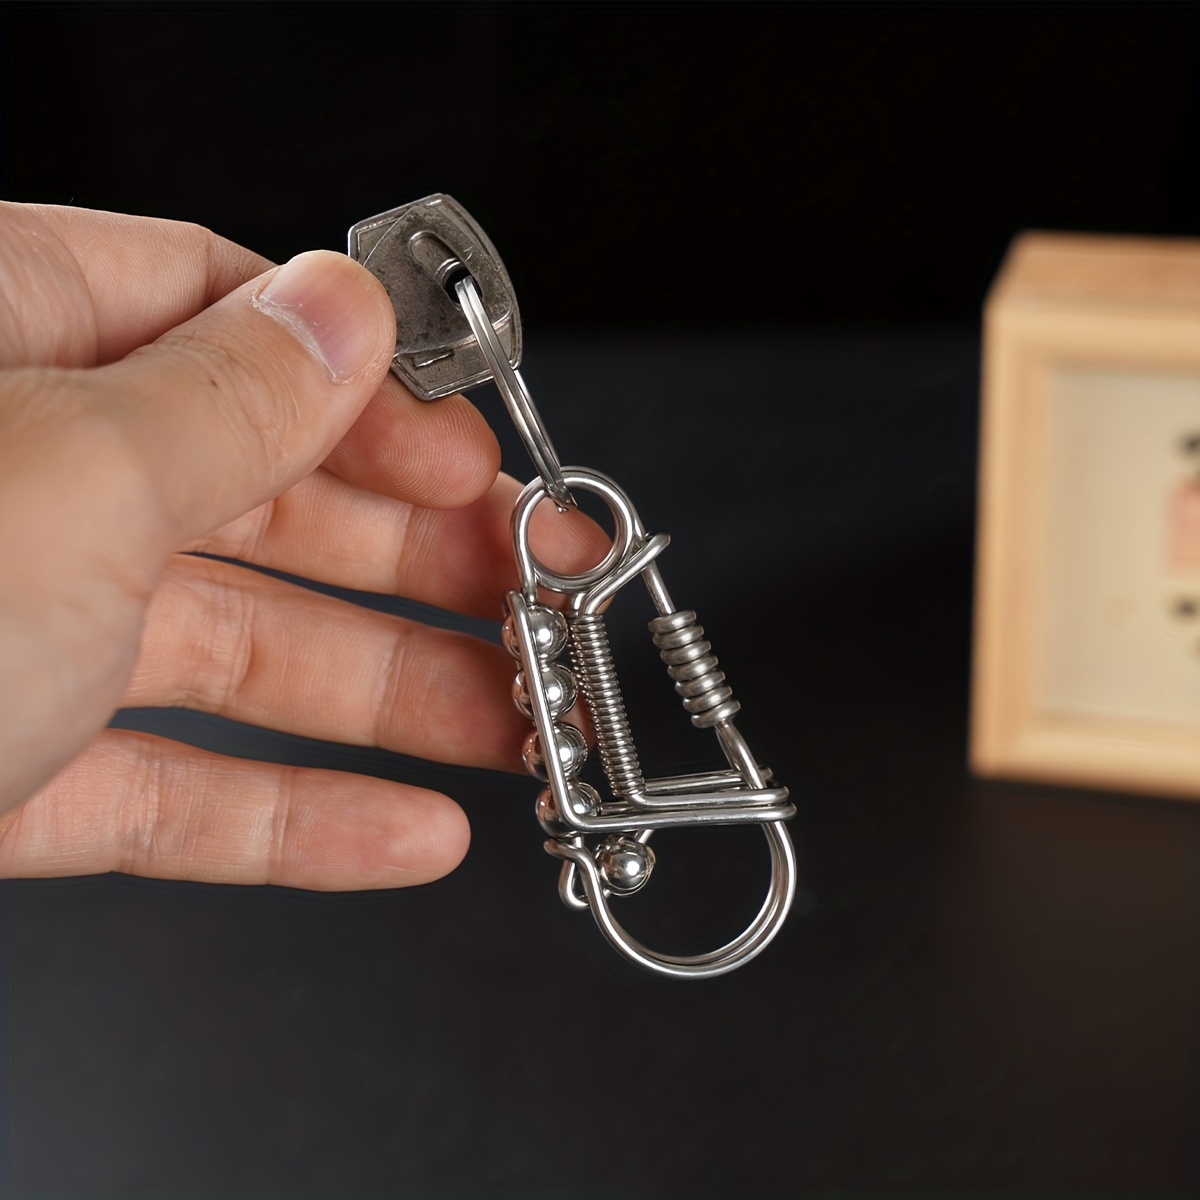 Handmade keychain made from stainless steel wire, the most unique